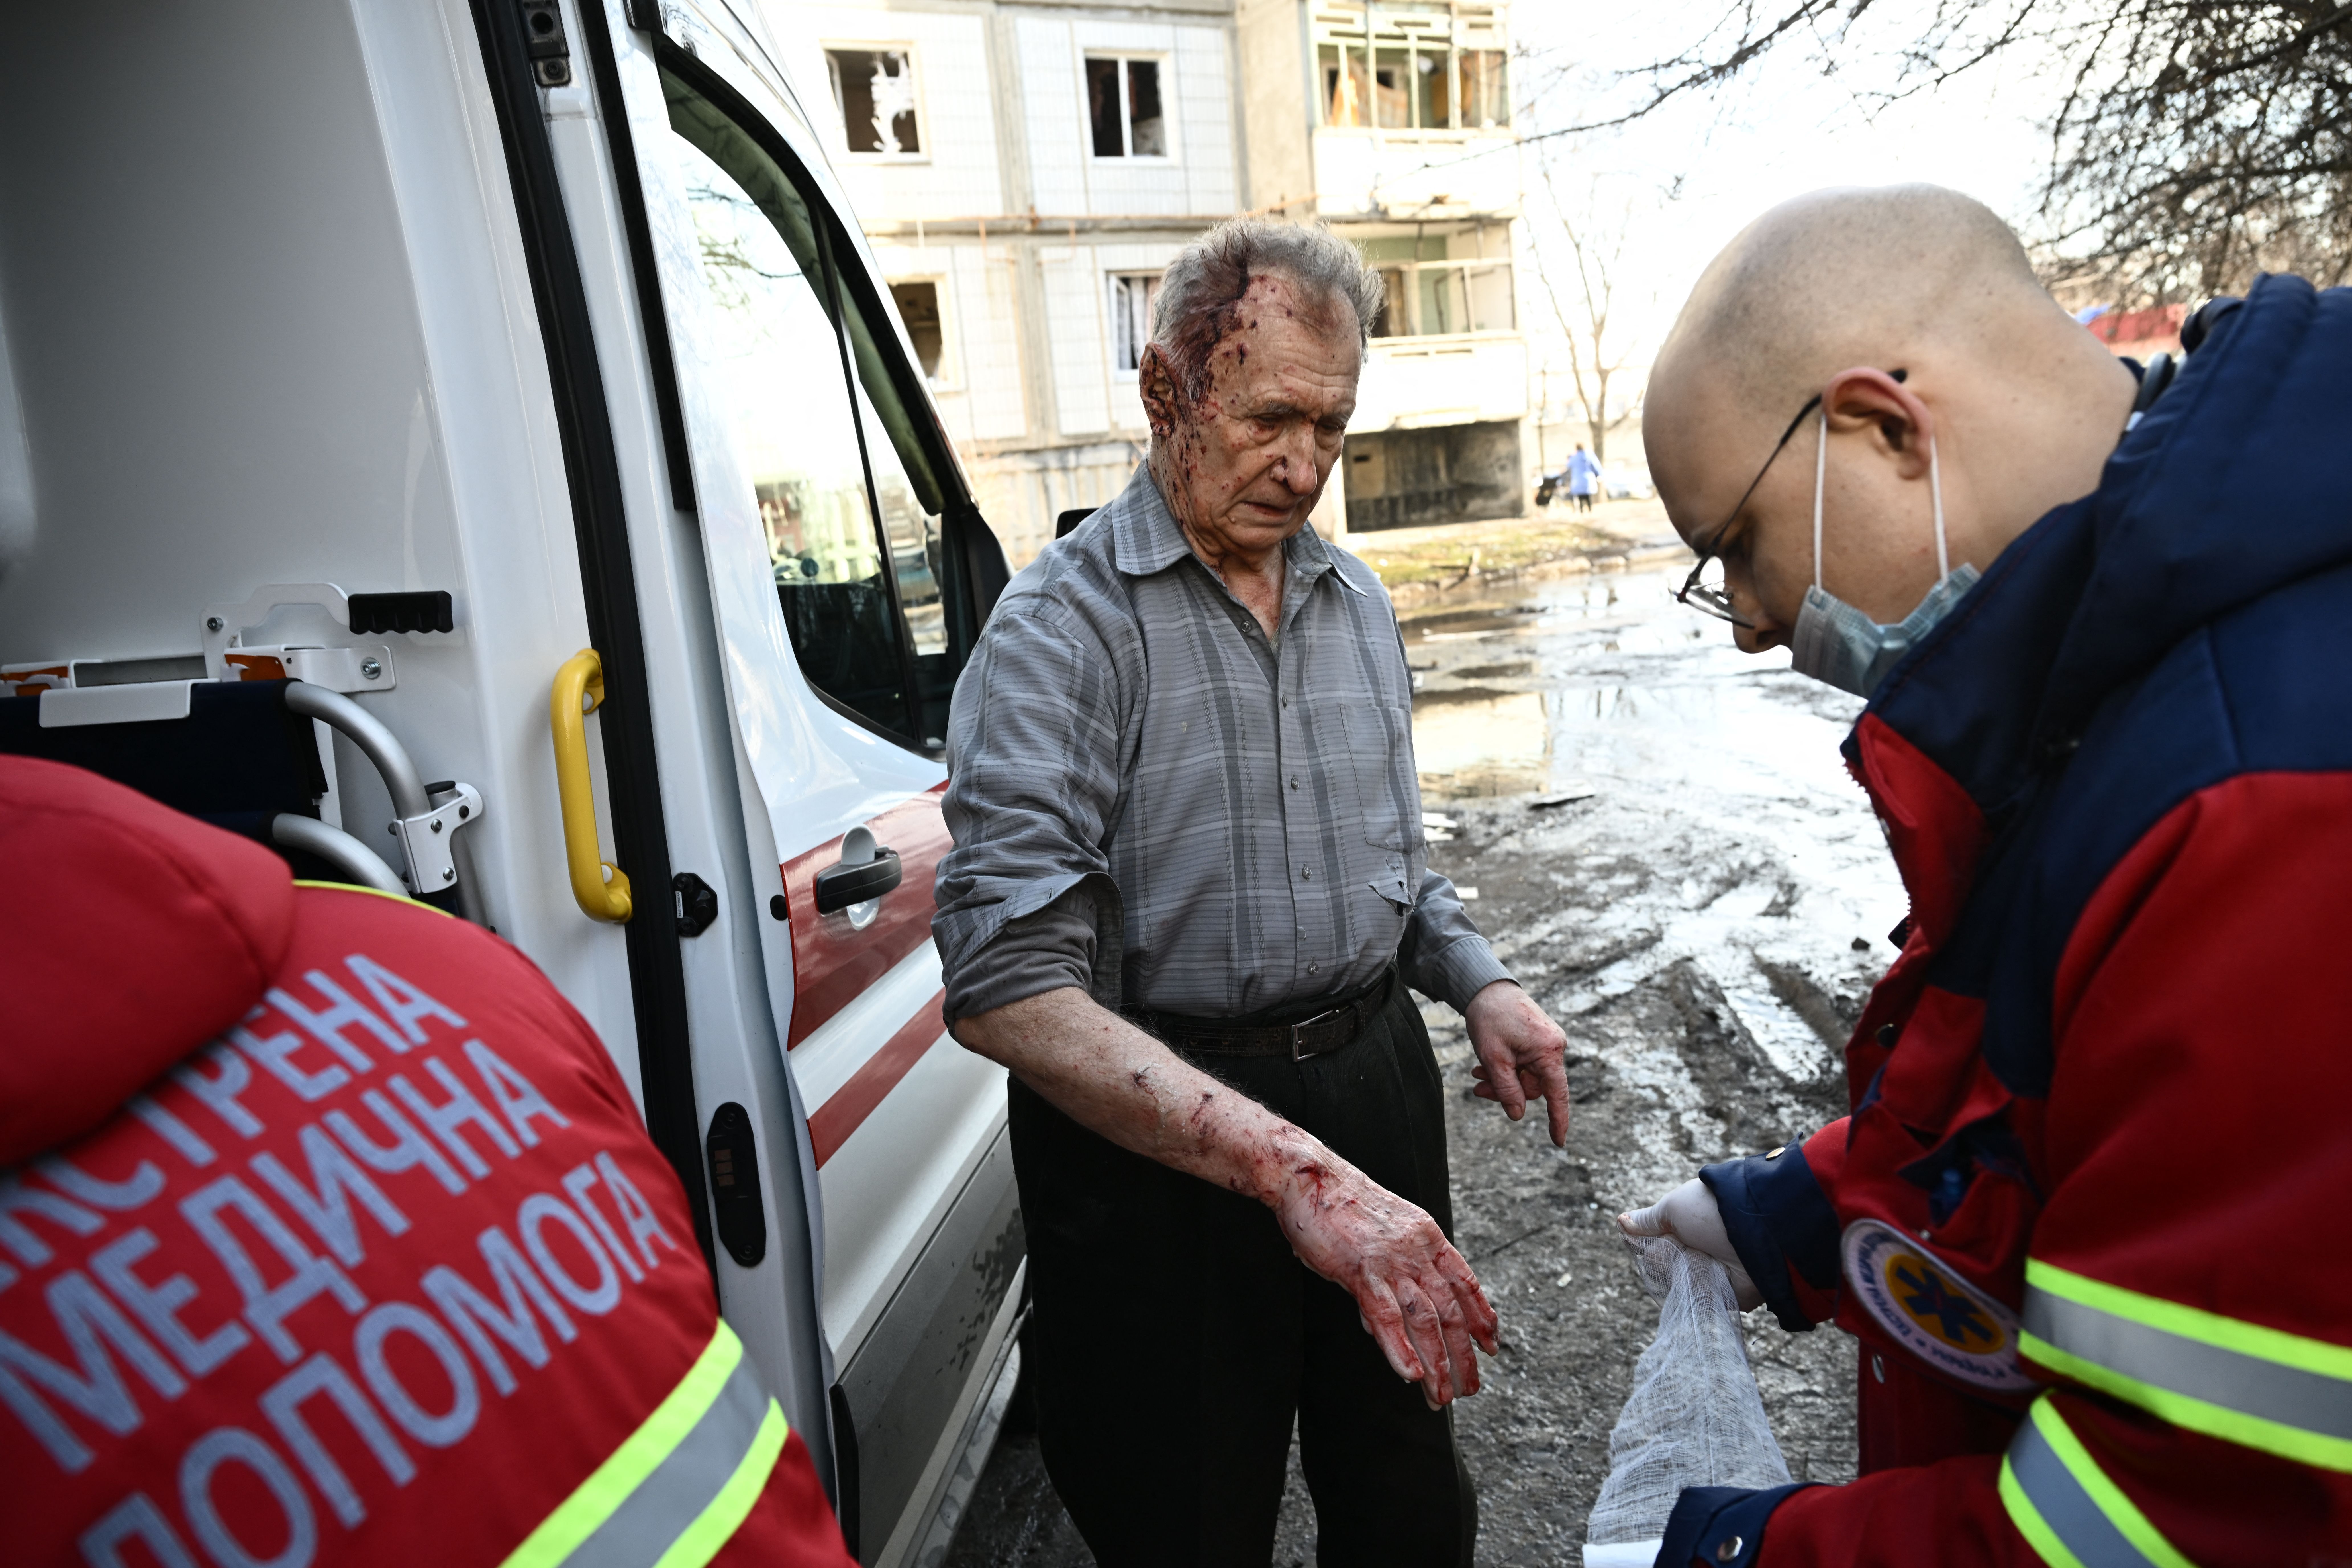 Emergency unit staff treat an injured man after bombings on the eastern Ukraine town of Chuguiv on February 24, 2022, as Russian armed forces are trying to invade Ukraine from several directions, using rocket systems and helicopters to attack Ukrainian position in the south, the border guard service said. - Russia's ground forces today crossed into Ukraine from several directions, Ukraine's border guard service said, hours after President Vladimir Putin announced the launch of a major offensive. Russian tanks and other heavy equipment crossed the frontier in several northern regions, as well as from the Kremlin-annexed peninsula of Crimea in the south, the agency said. (Photo by ARIS MESSINIS/AFP via Getty Images)